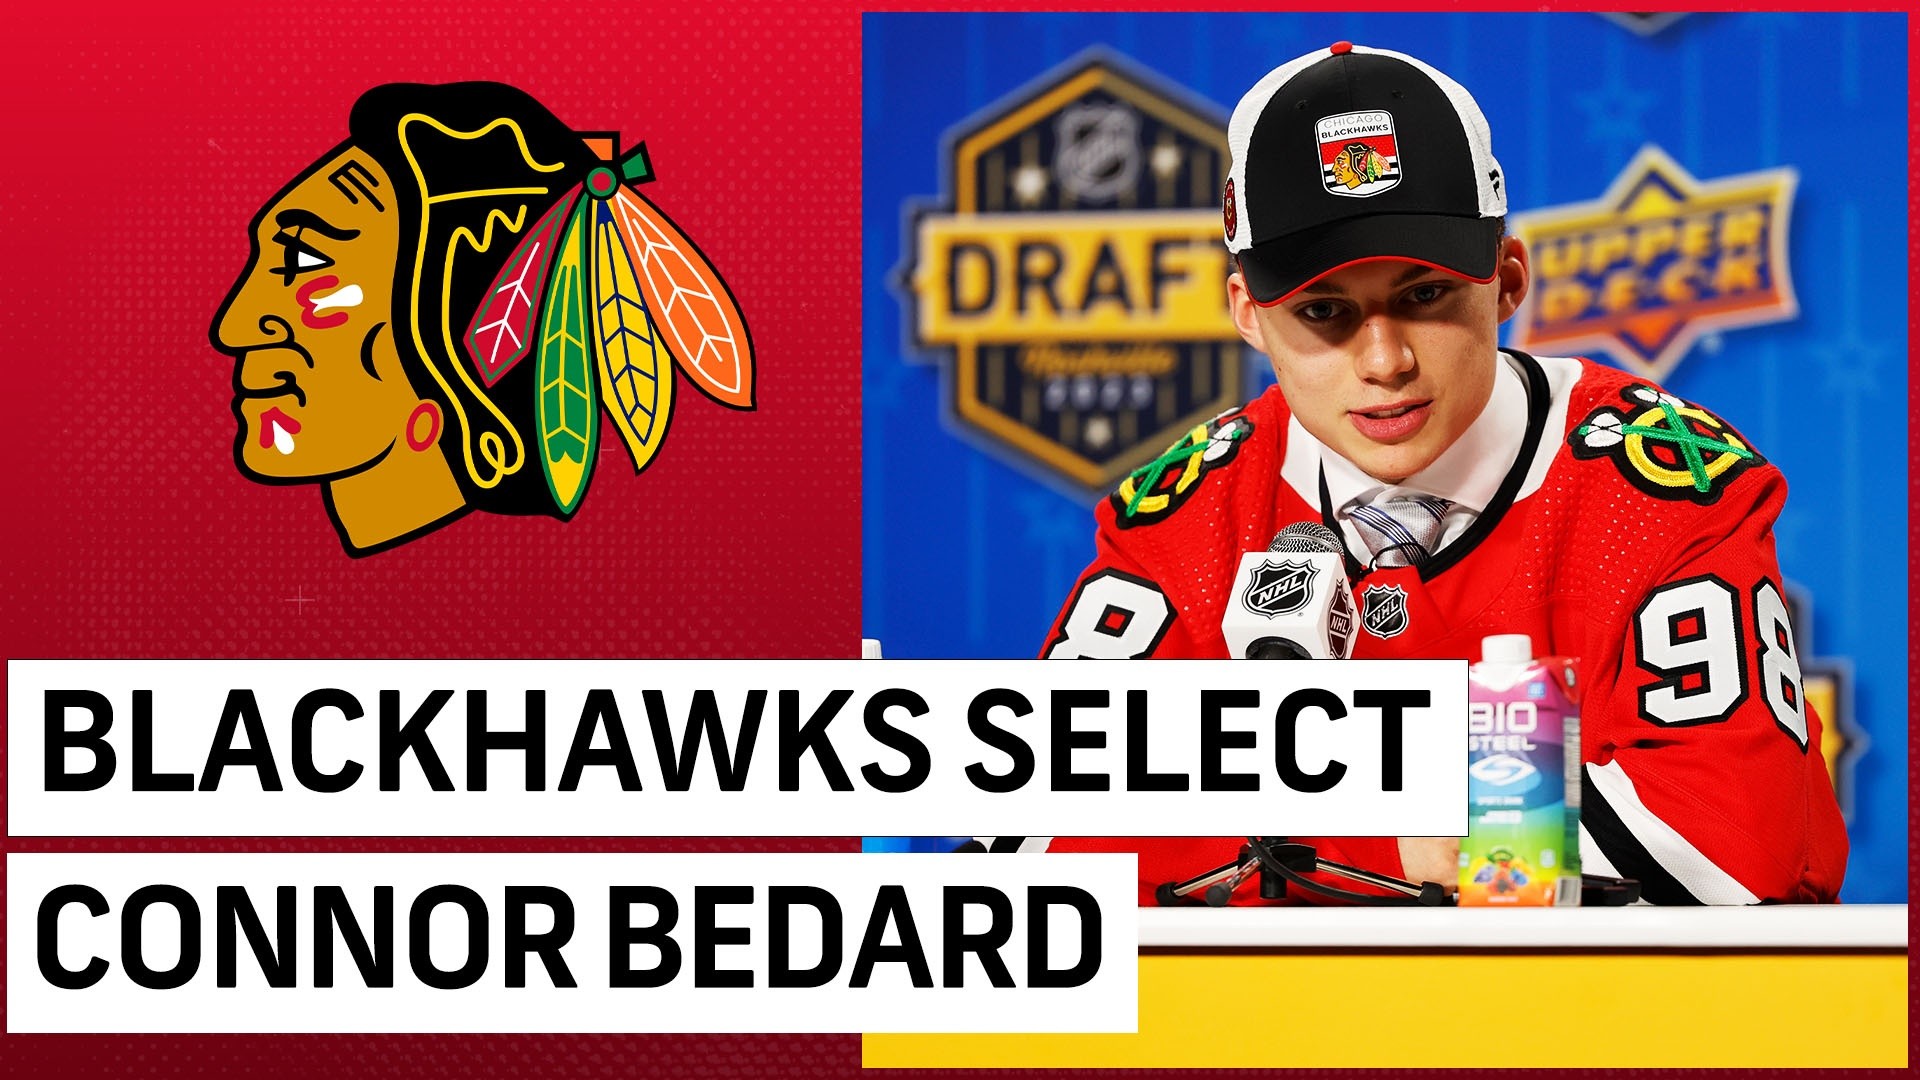 Blackhawks select Connor Bedard with the No. 1 pick in the 2023